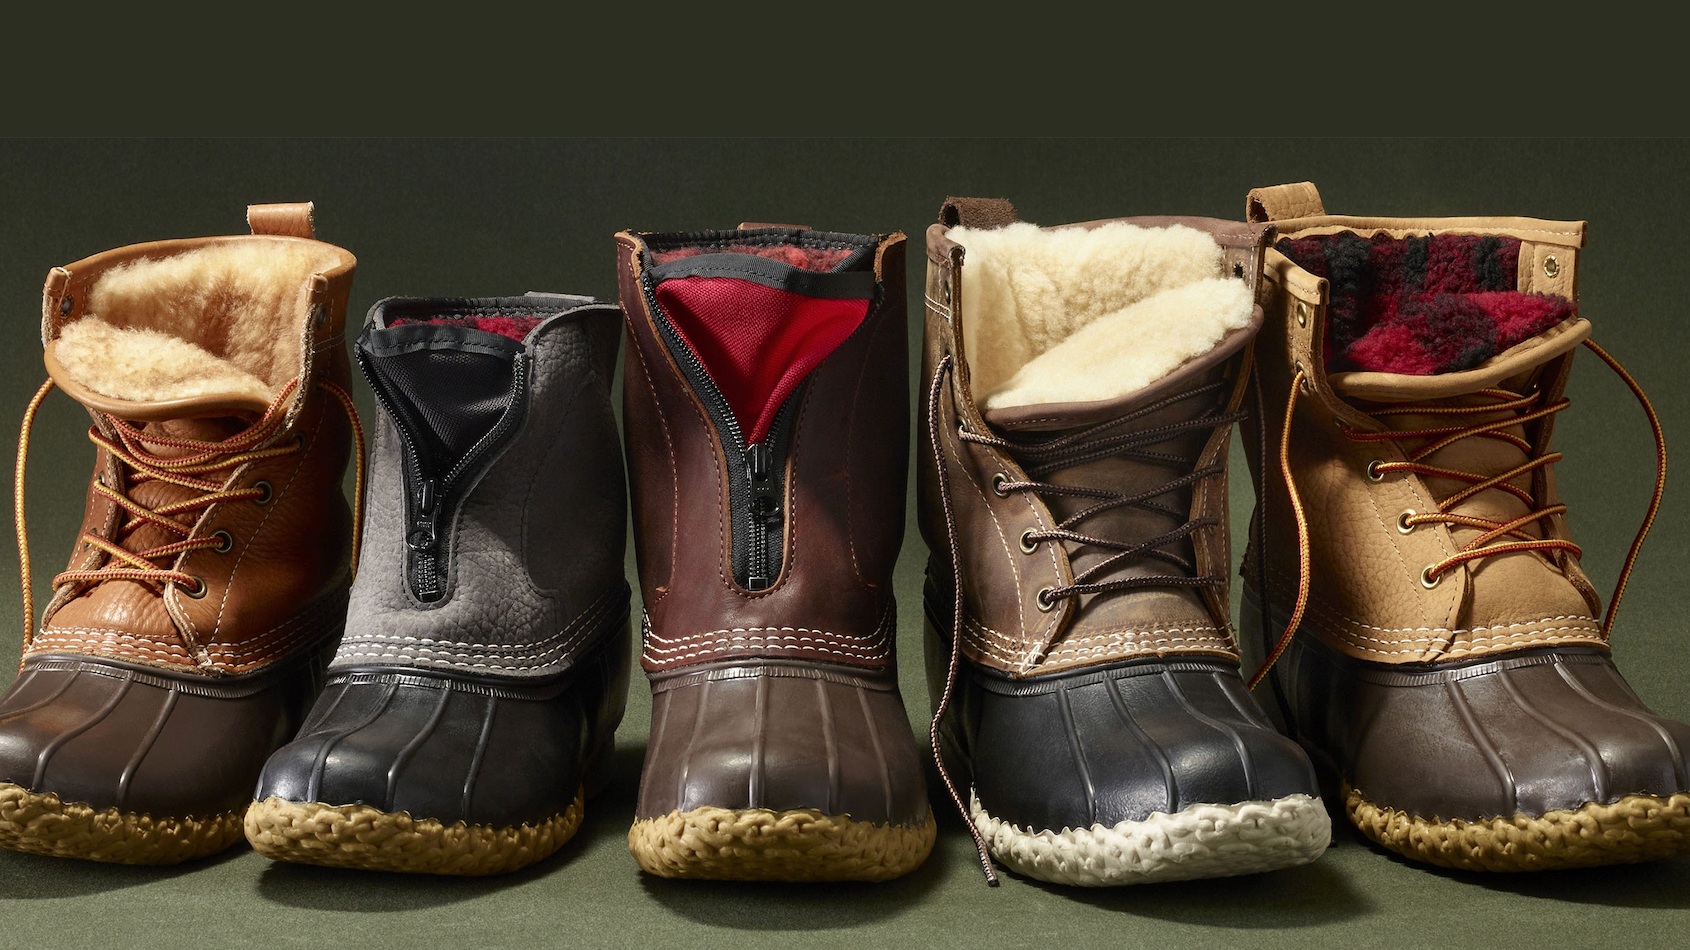 Best Winter Boots for Men Blundstone, Clarks, Dr. Martens and More | Entertainment Tonight